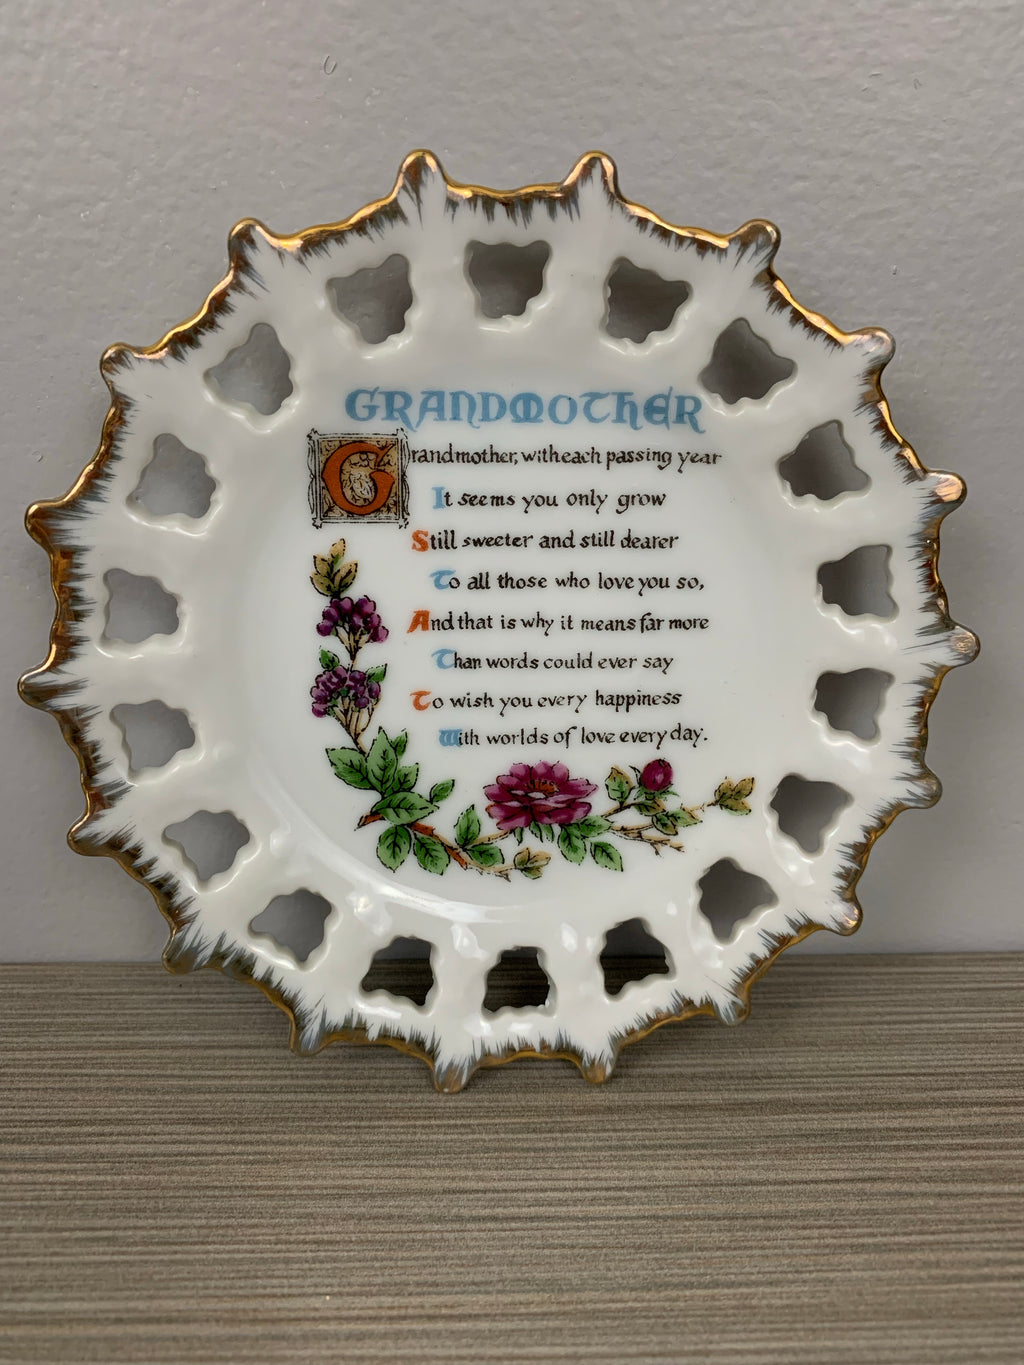 Vintage Collectible plate w/ Grandmother Poem Reticulated Pierced Edge GOLD